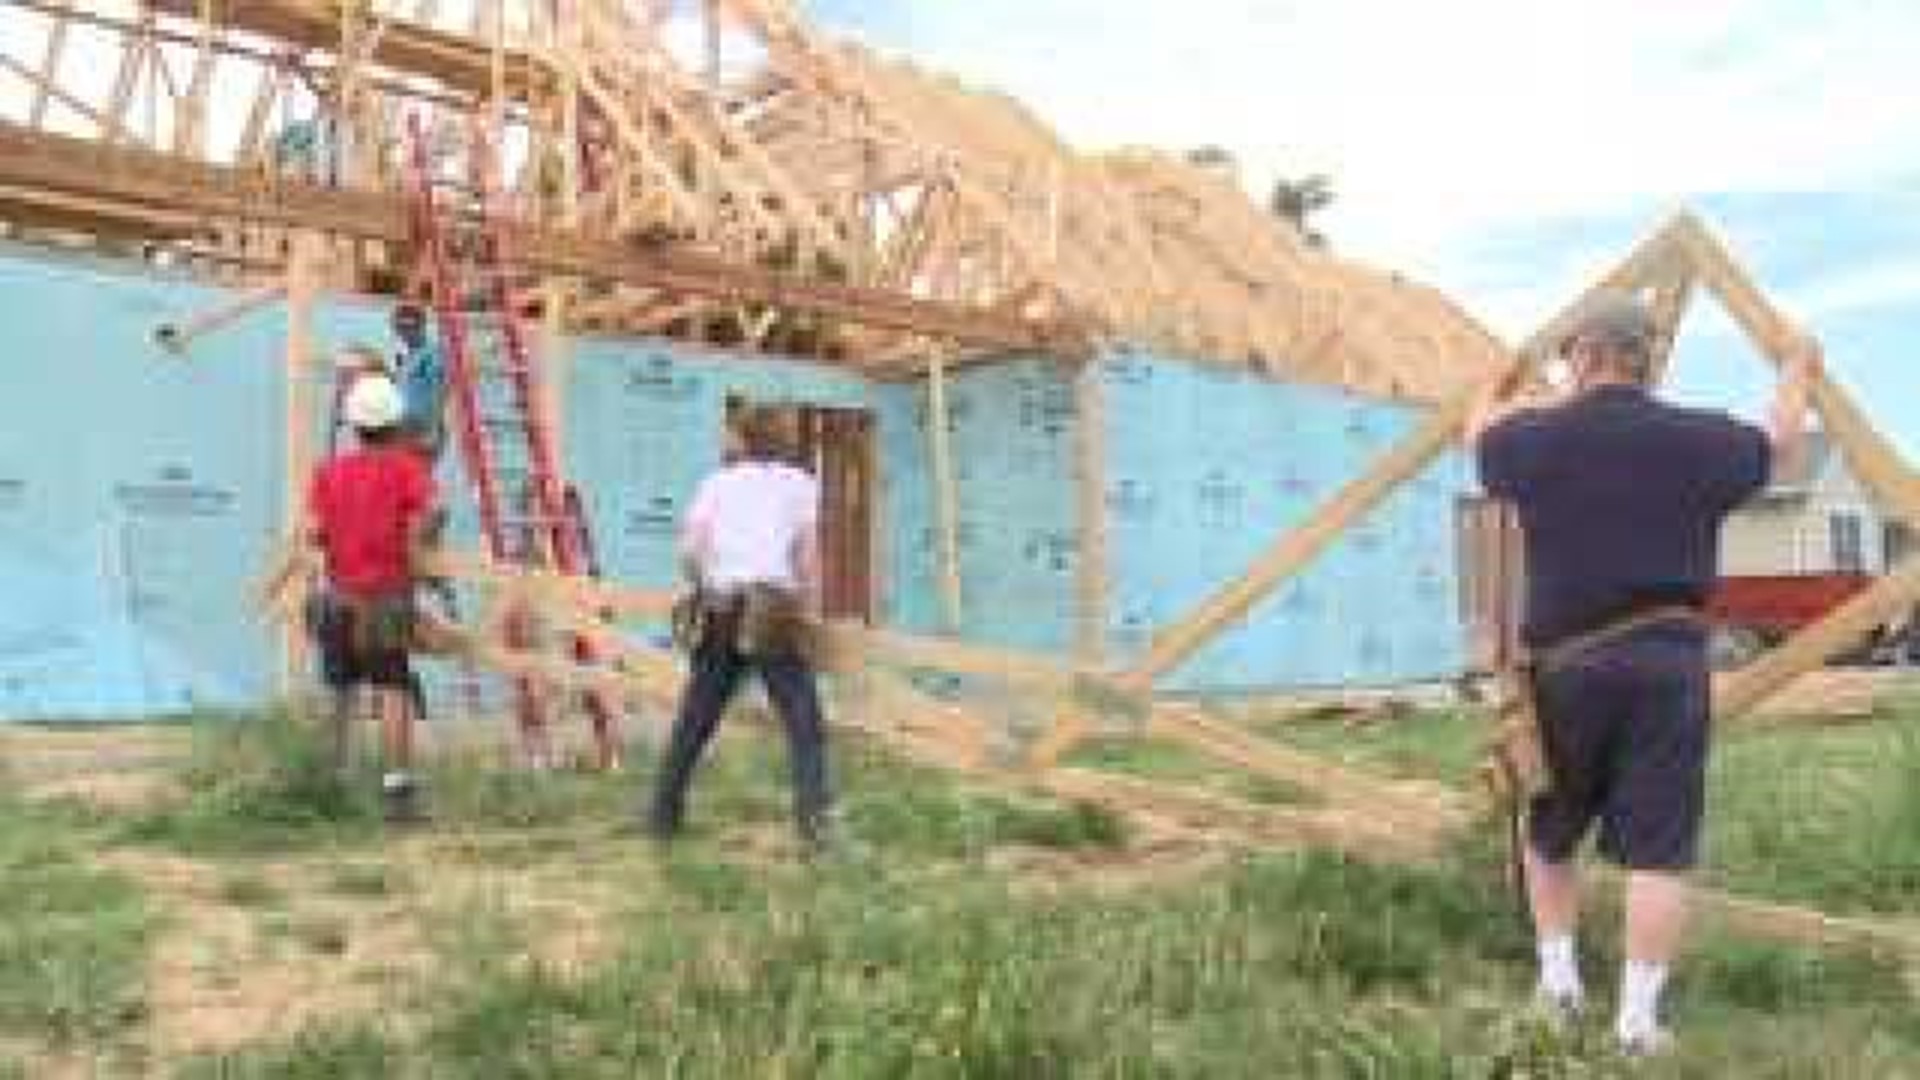 UTHS students build house